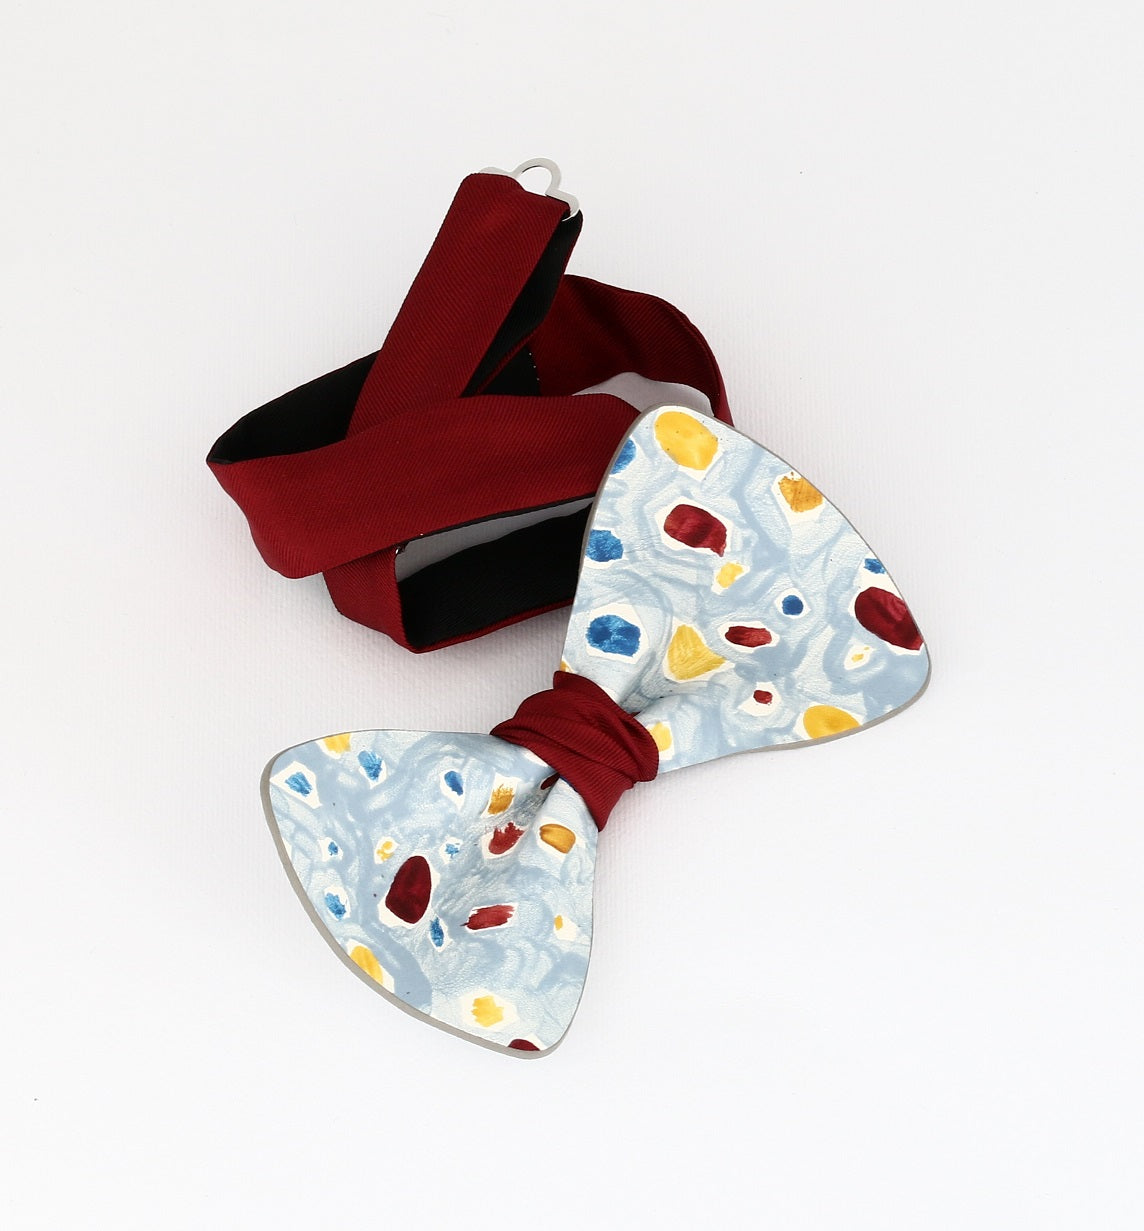 harlequin's choice hand painted bow tie with blue yellow and red dots on a light blue background